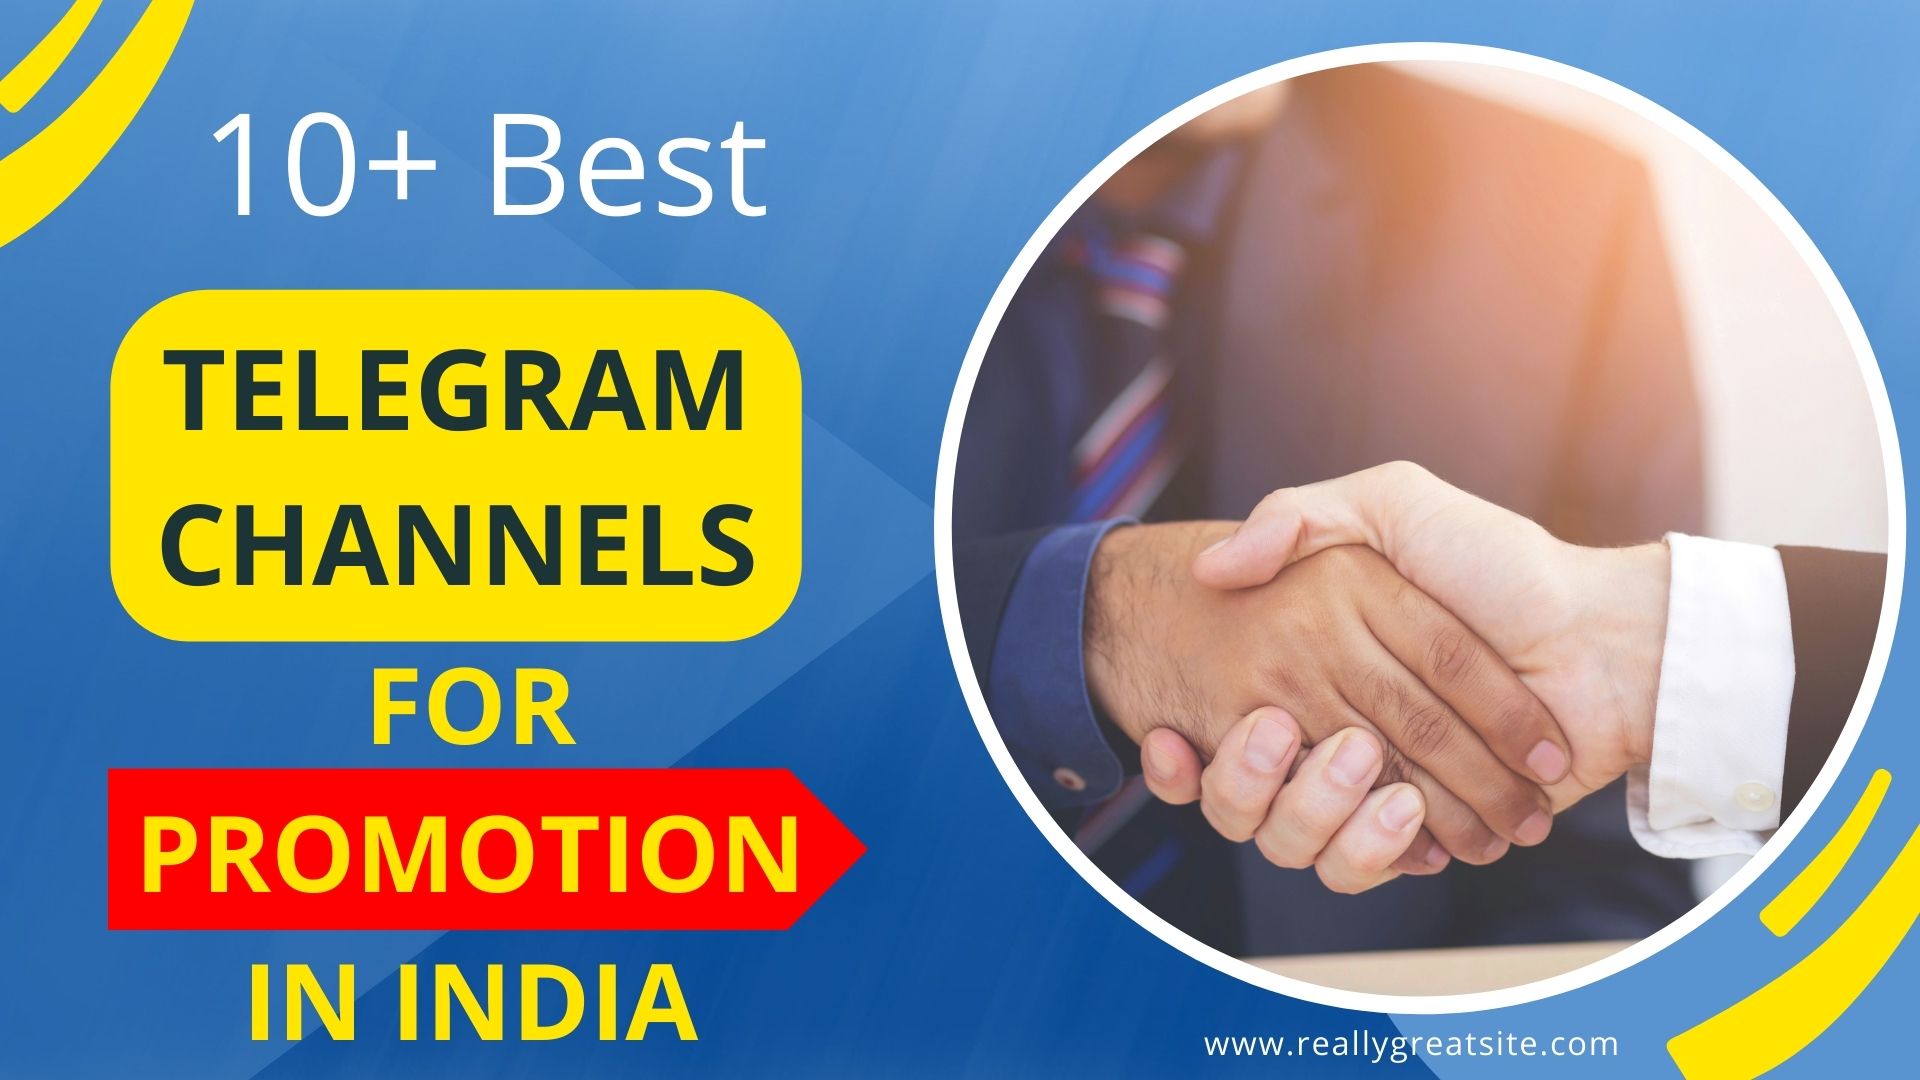 Telegram-Channels-for-Promotion-in-India